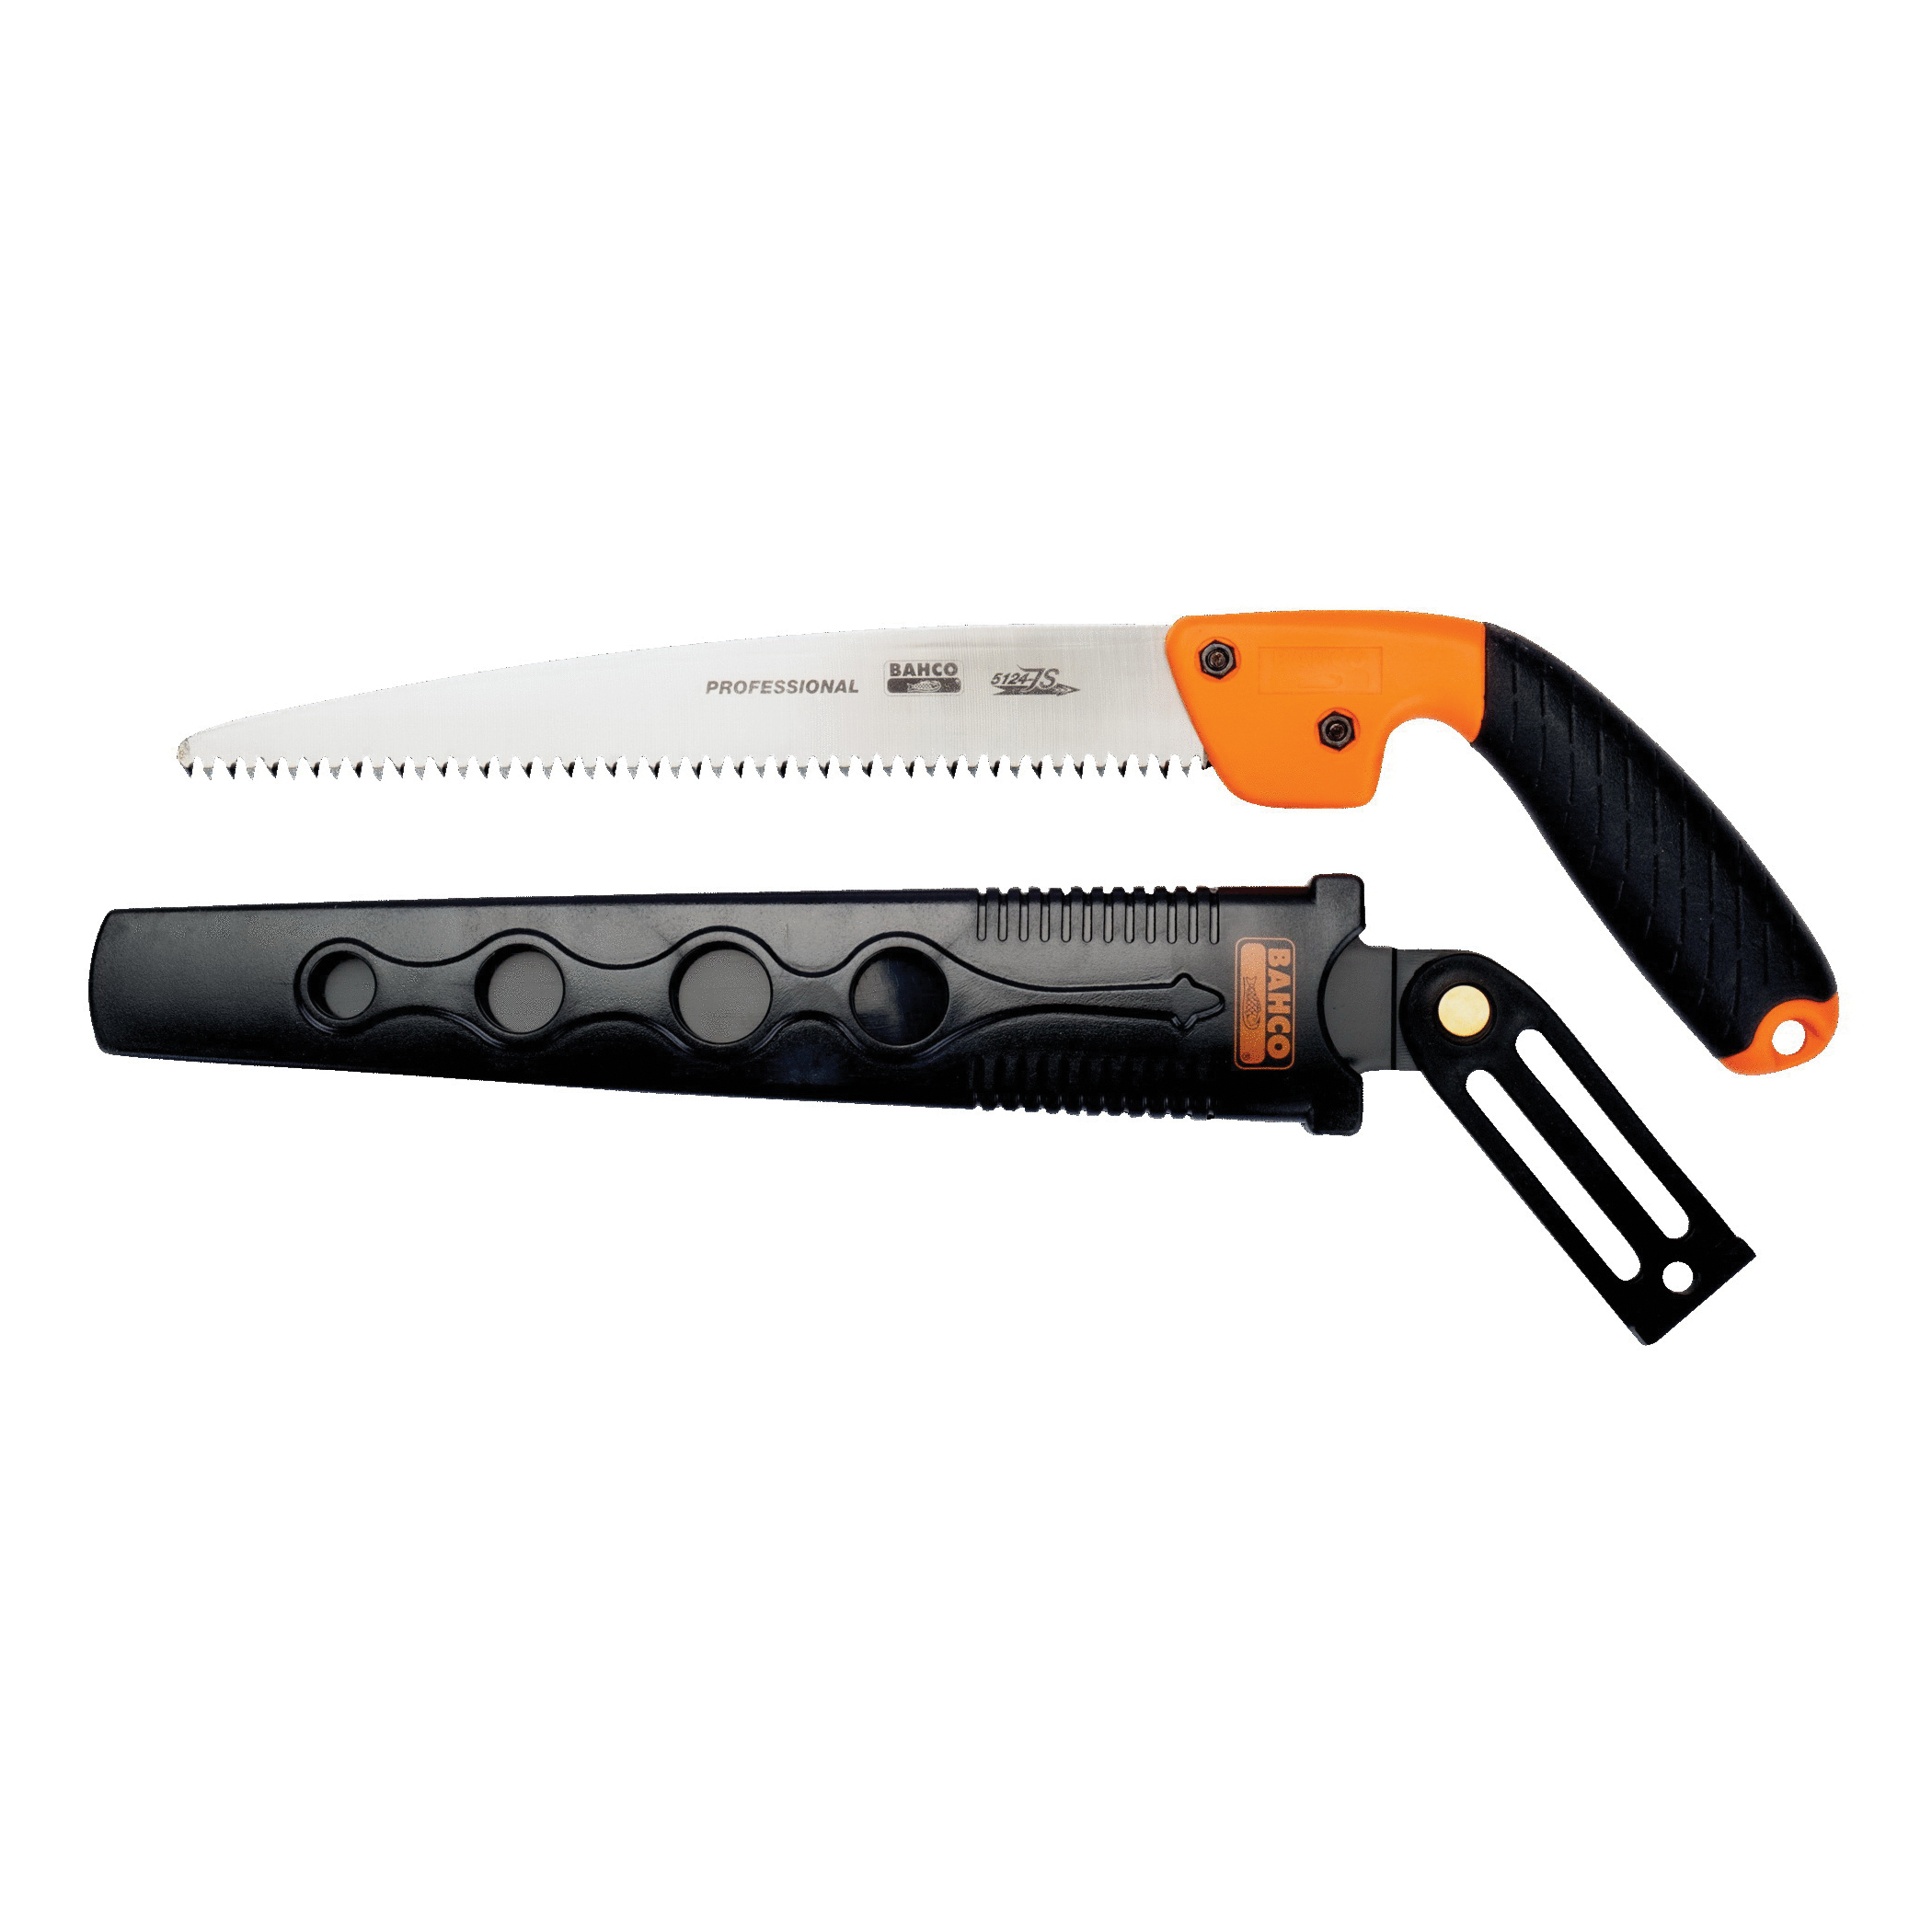 Bahco 5124-JS-H Pruning Saw with 2-Component Handle, 9-1/2 in Blade, 5 TPI, Comfort-Grip Handle - 2